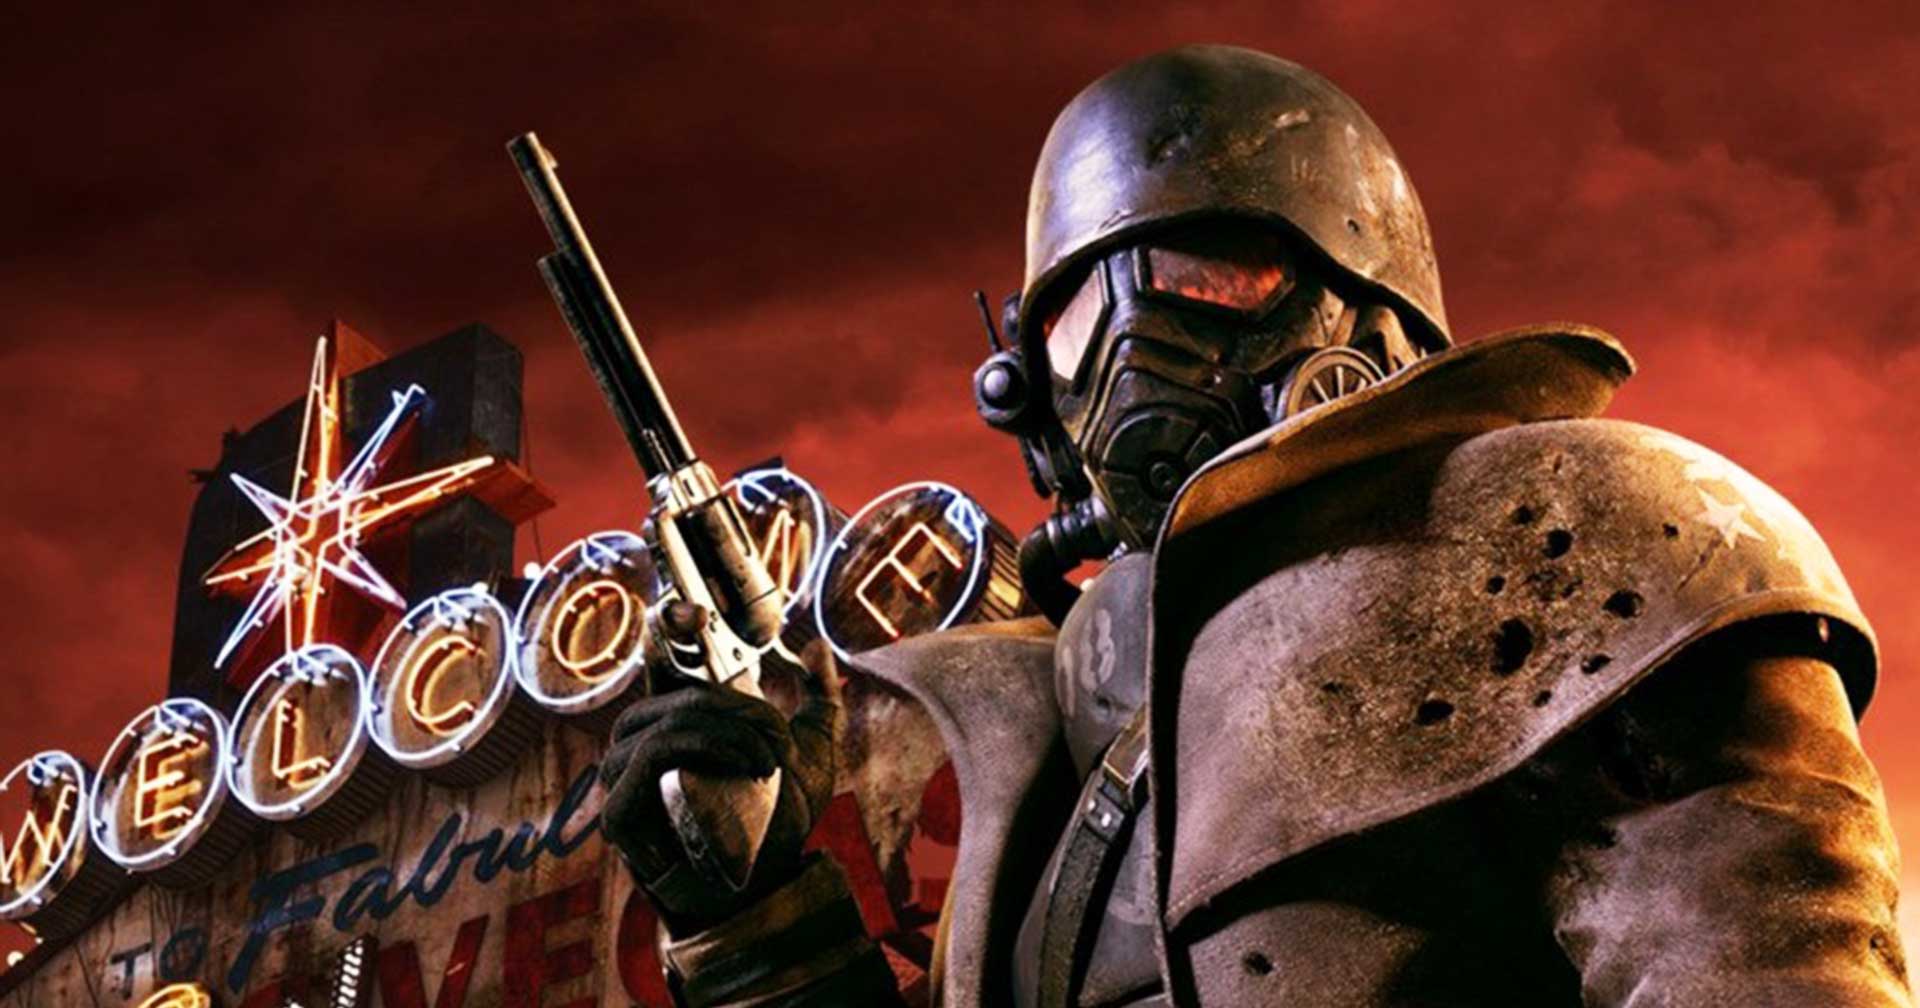 Fallout: New Vegas (Ultimate Edition) แจกฟรีบน Epic Games Store แล้ววันนี้